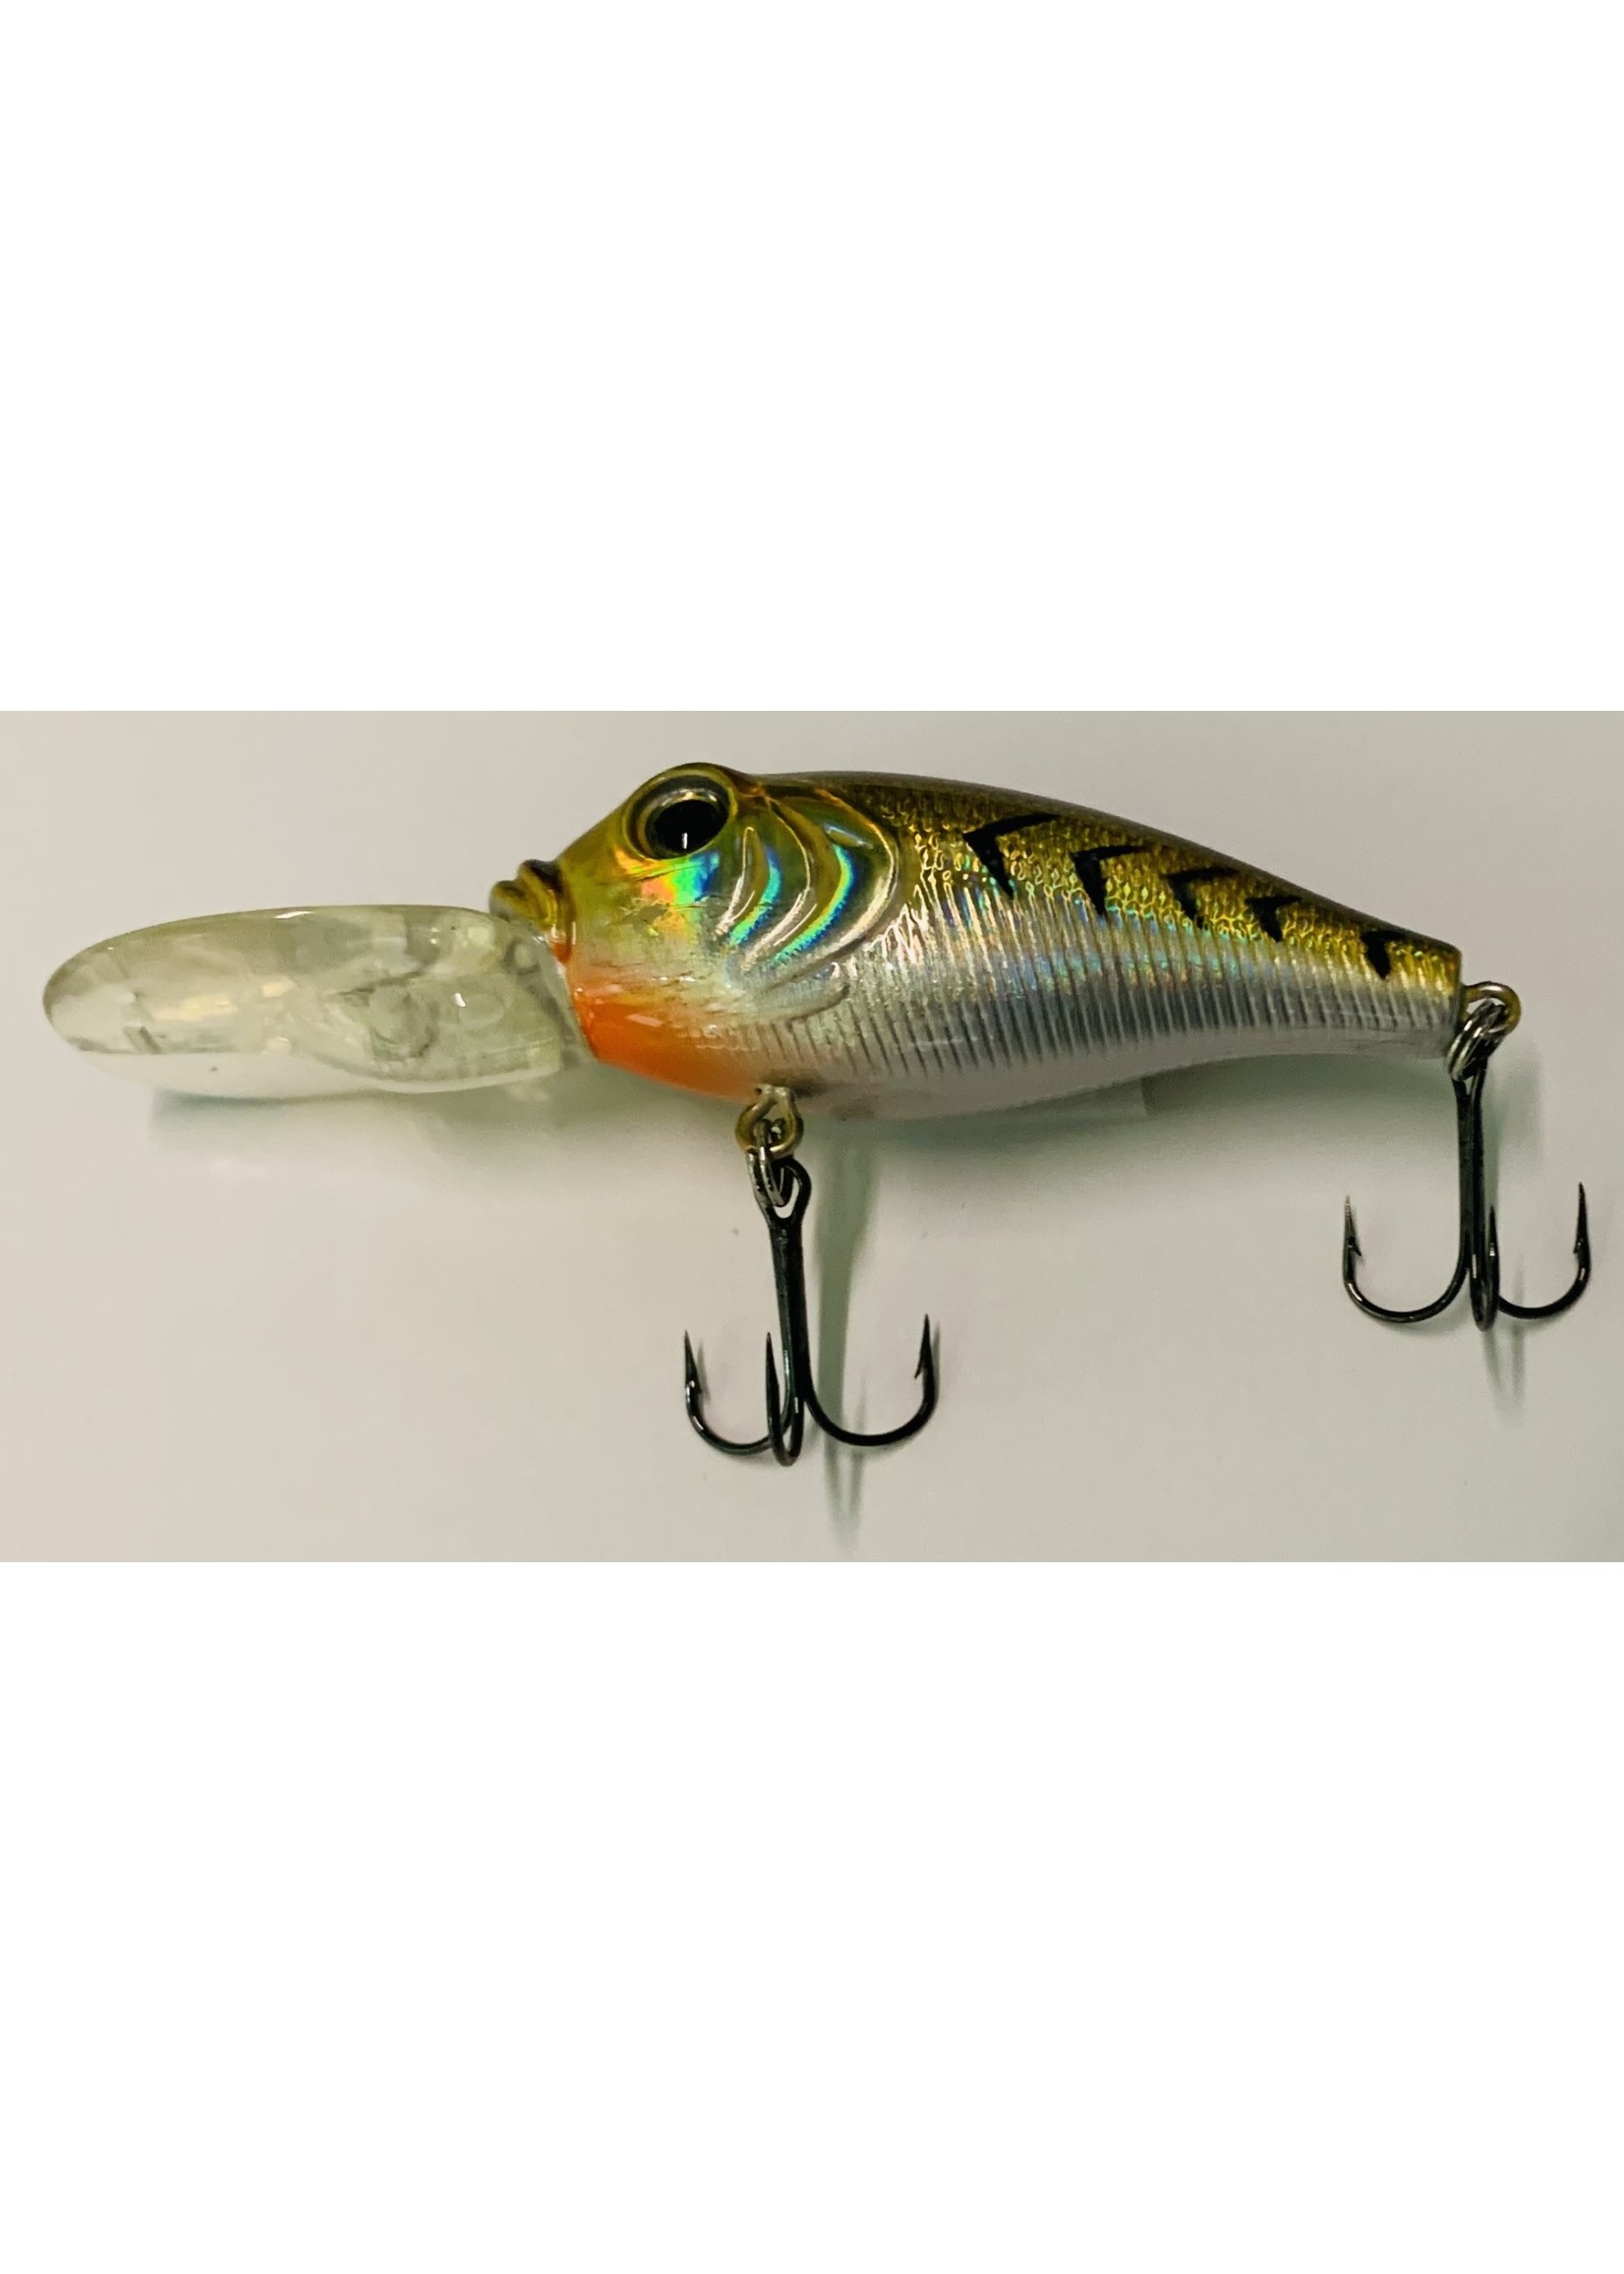 BELL OUTDOOR PRODUCTS SILVER CREEK LURE DEEP CRANK 6.5cm DIVE 3-5 FT